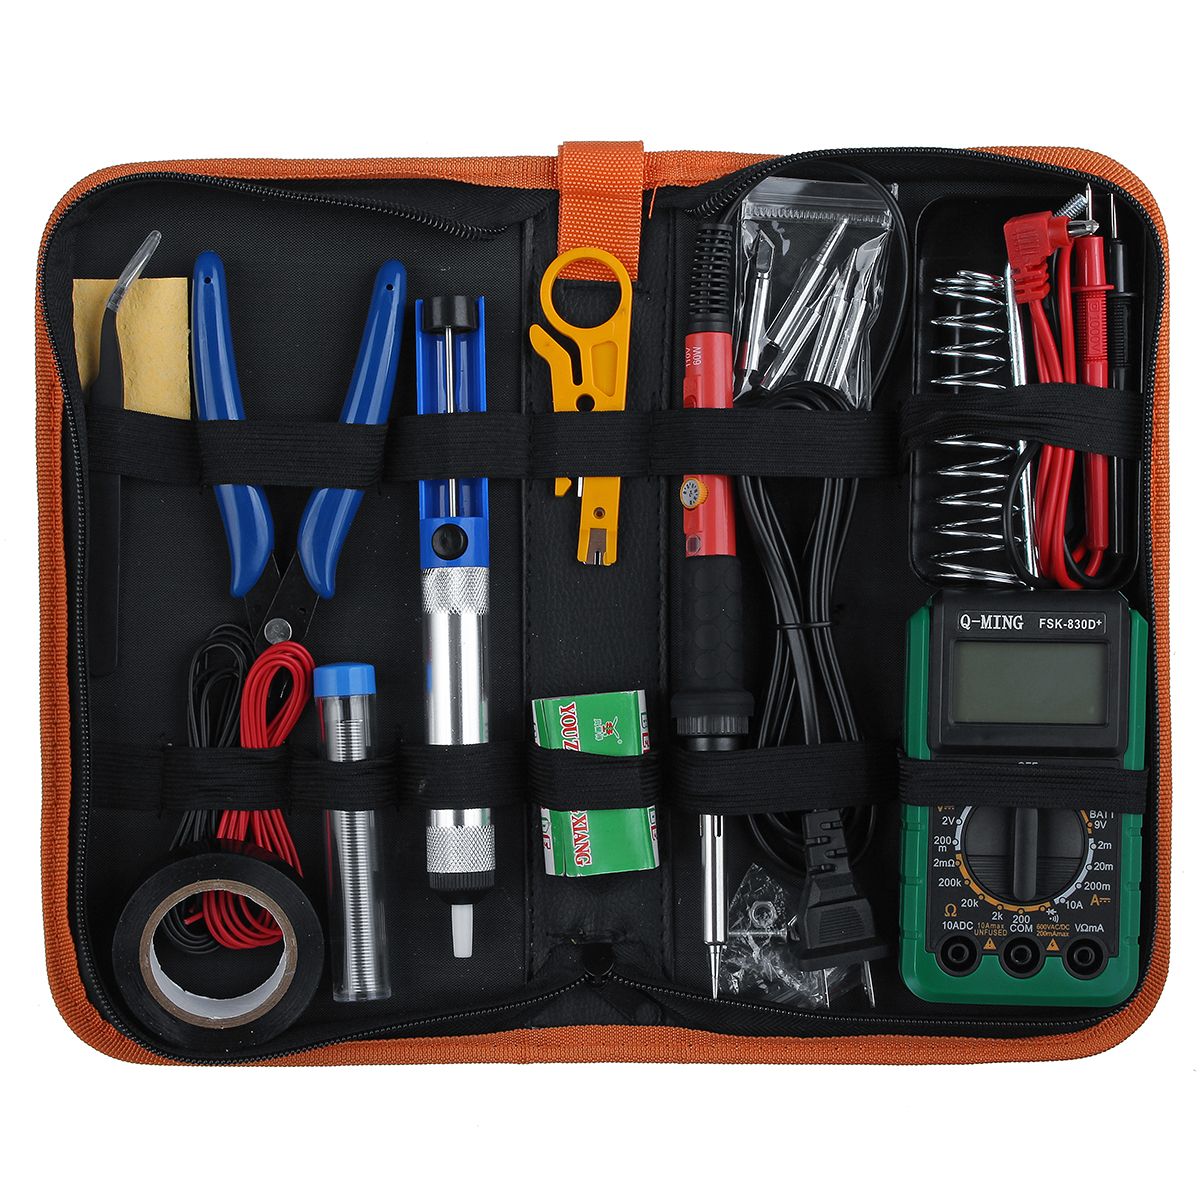 110V-60W-22Pcs-Electric-Adjustable-Temperature-Soldering-Iron-Kit-Welding-Tool-With-Multimeter-1656185